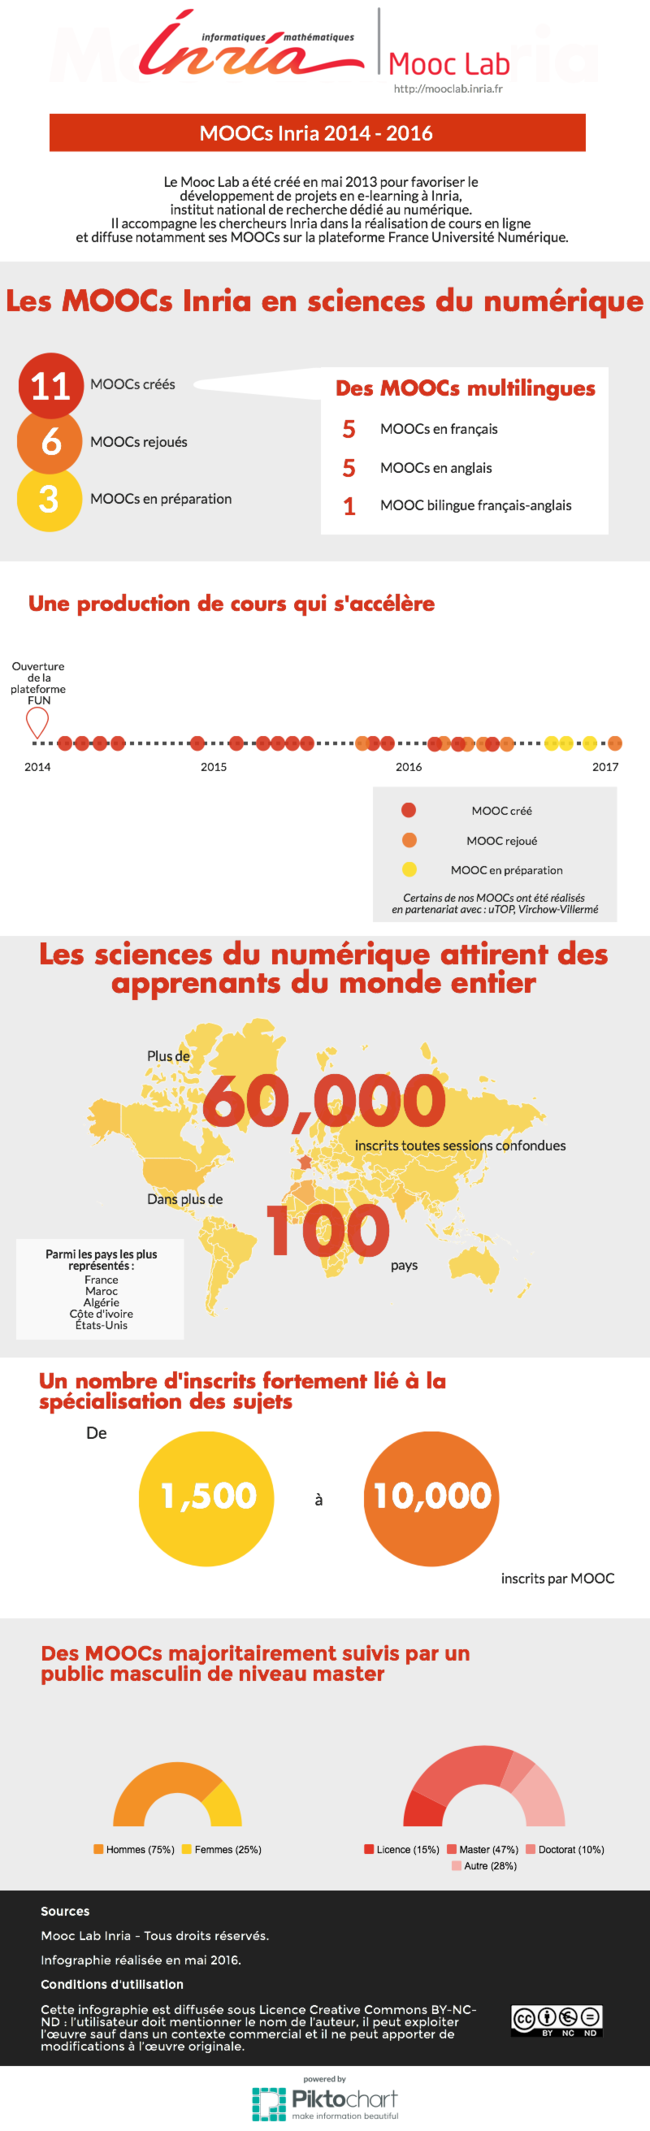 Infographie MOOCLab